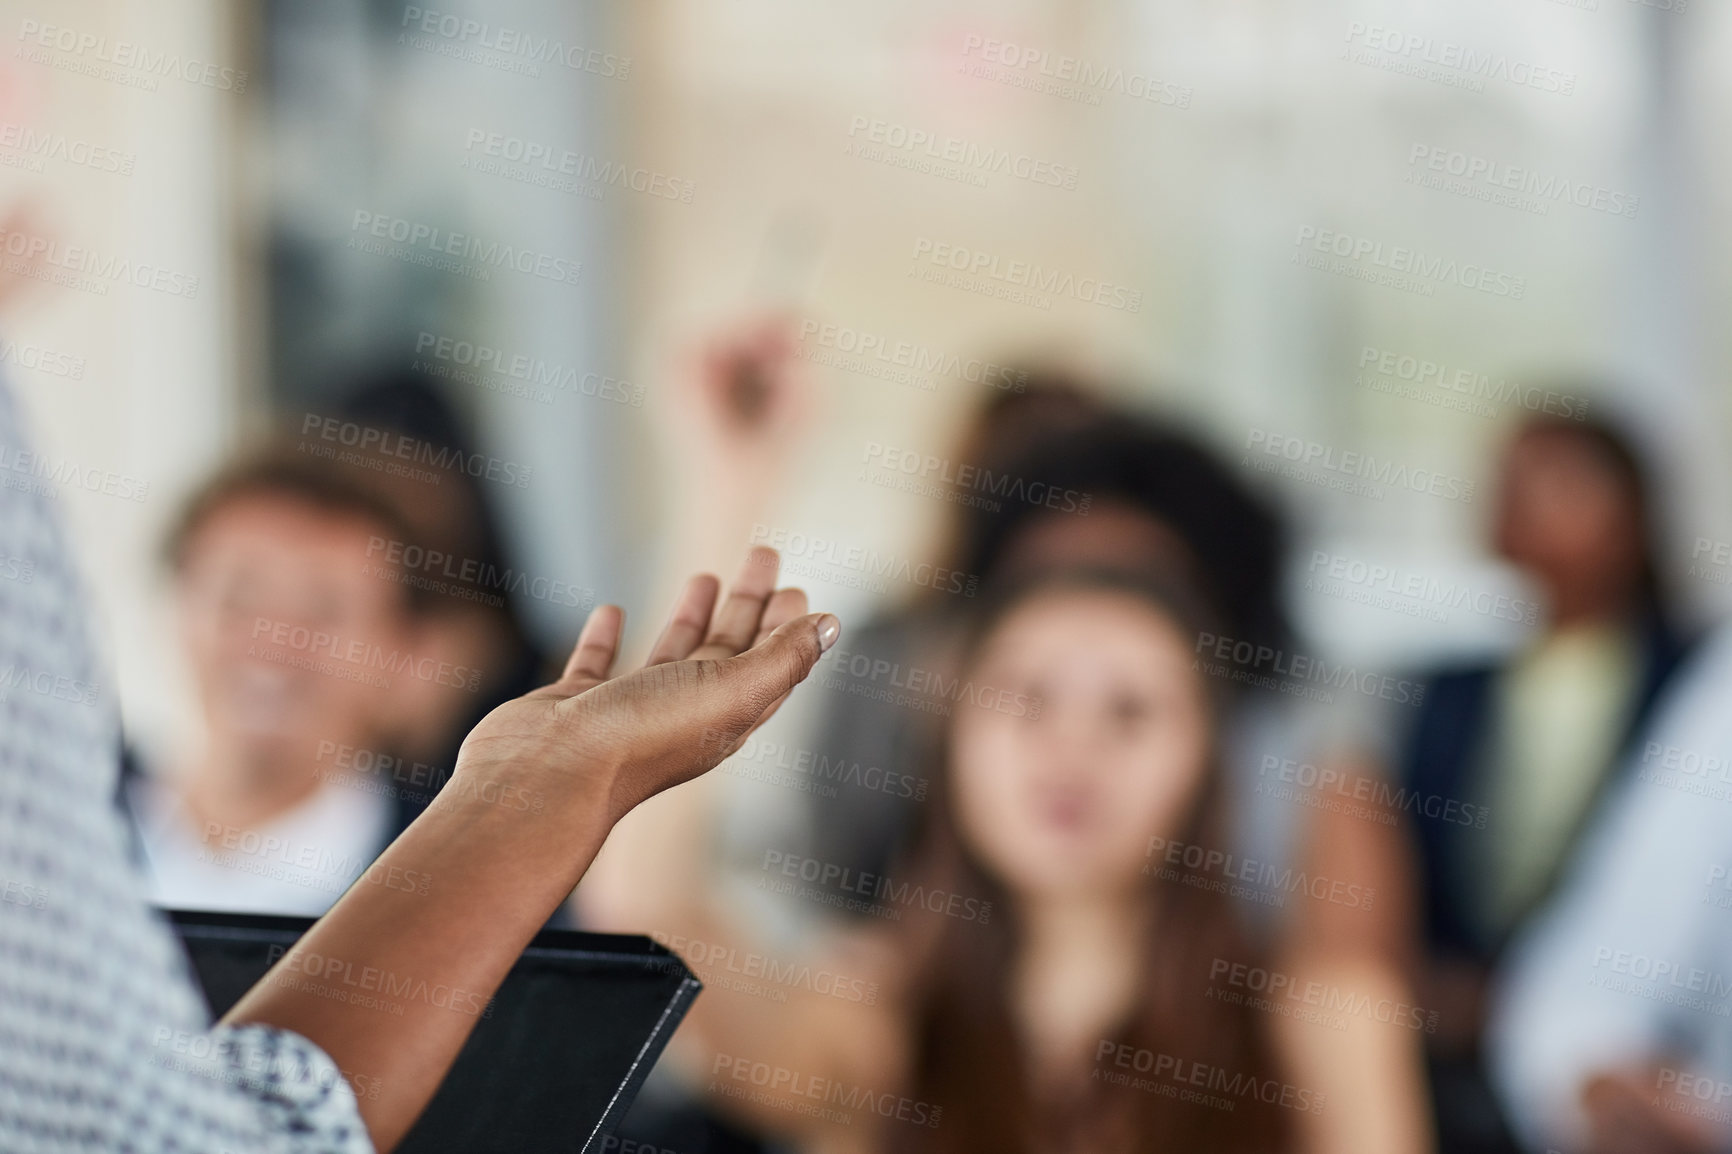 Buy stock photo Rearview shot of an unrecognizable businesswoman speaking at a business conference